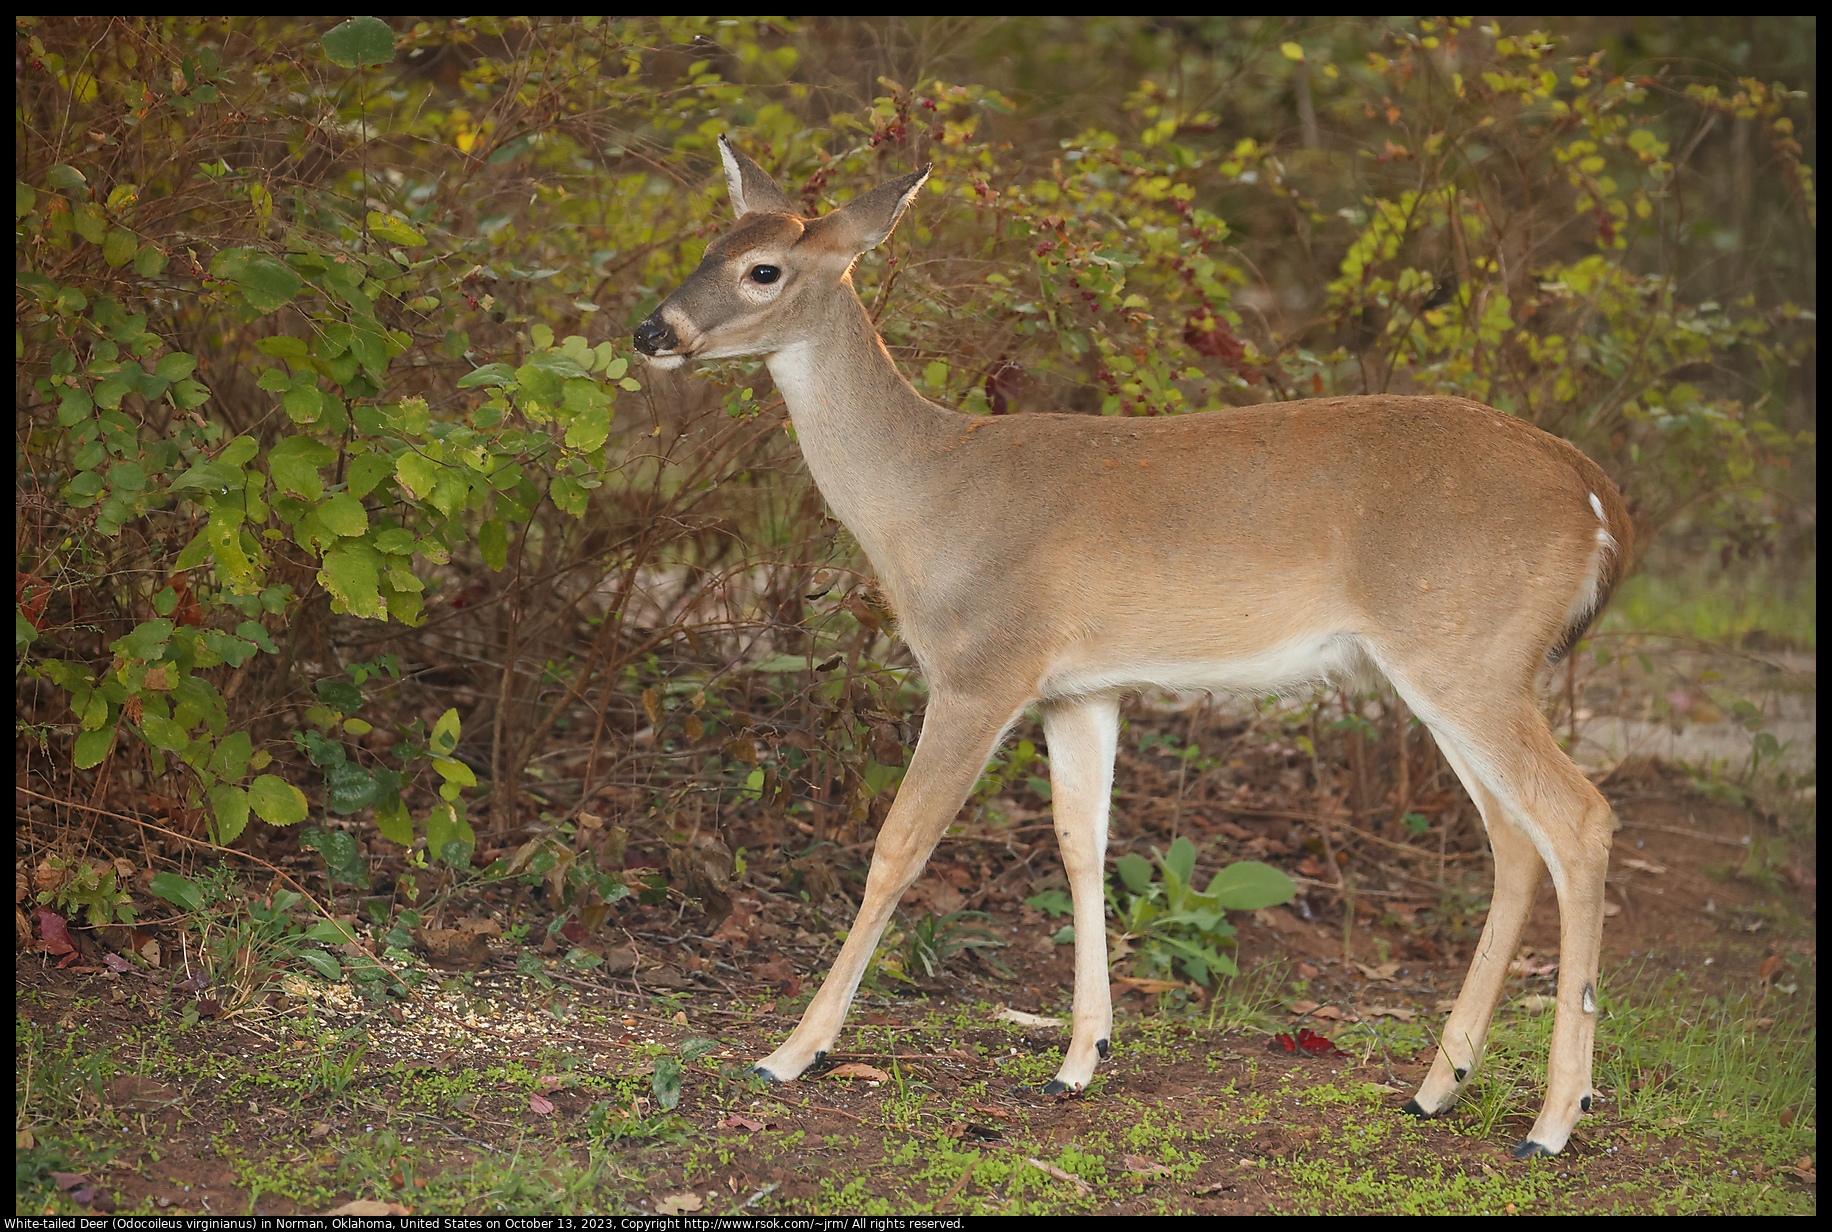 White-tailed Deer (Odocoileus virginianus) in Norman, Oklahoma, United States on October 13, 2023